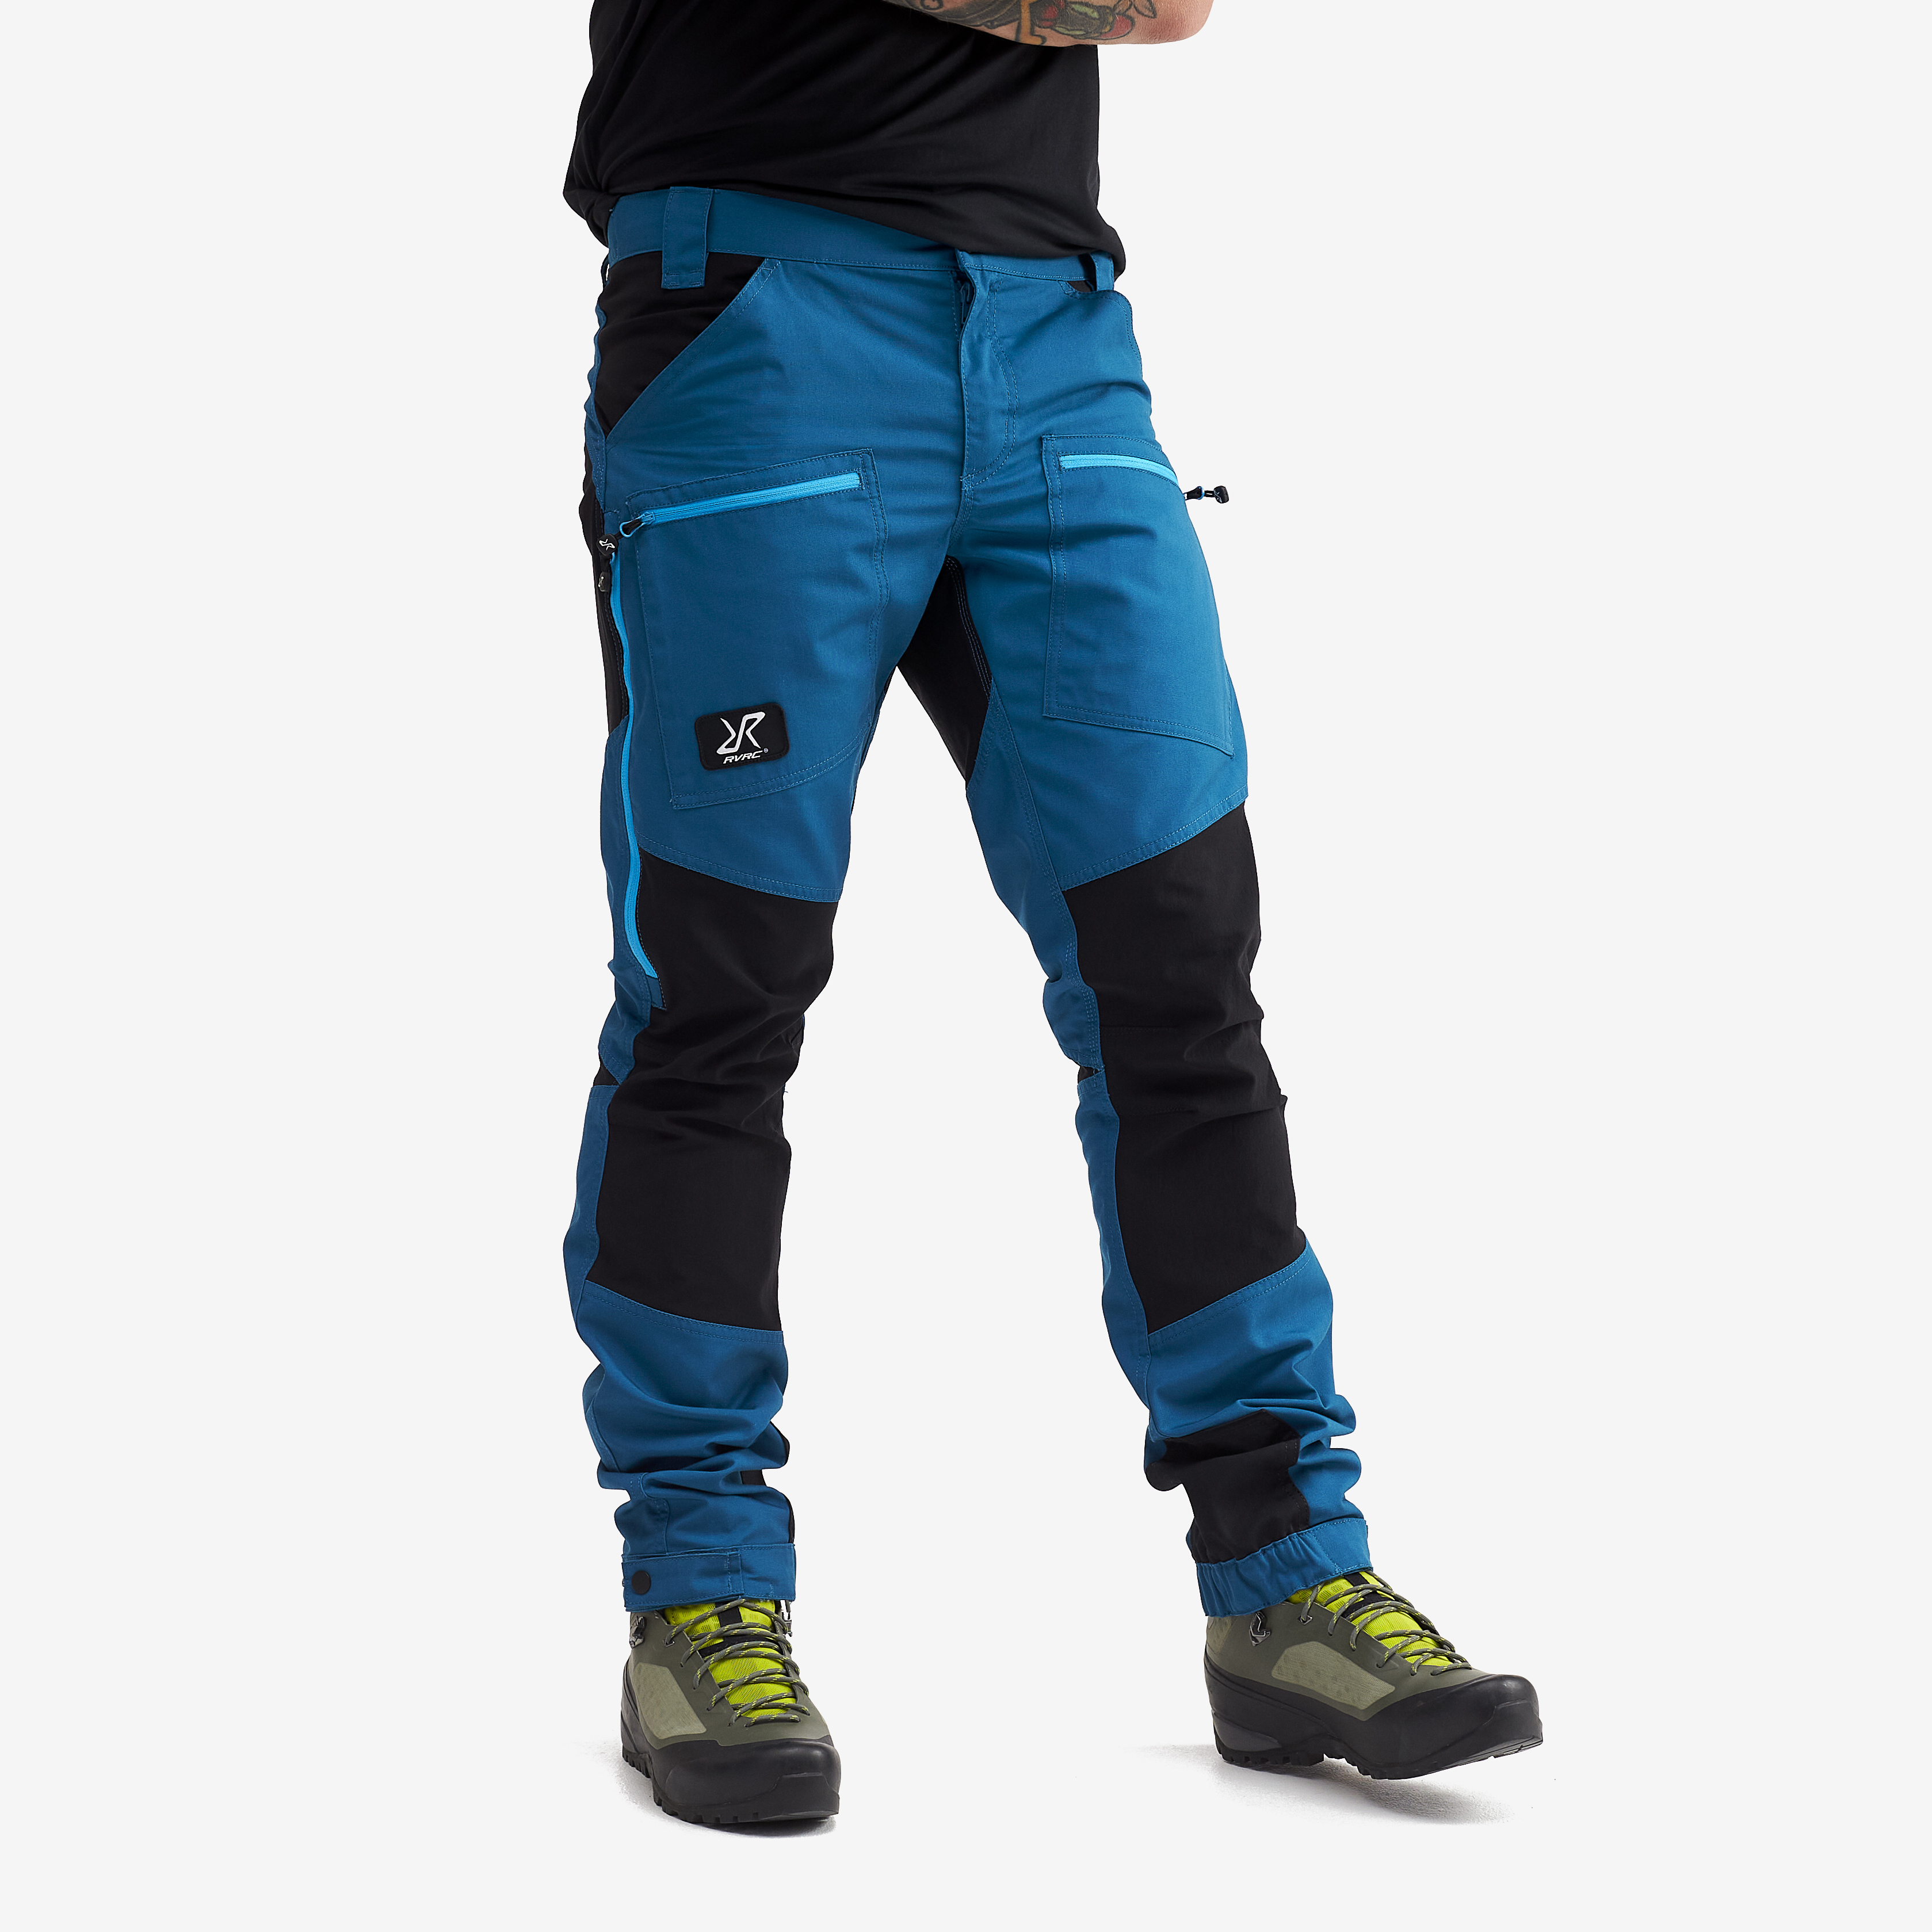 Nordwand Pro hiking pants for men in blue